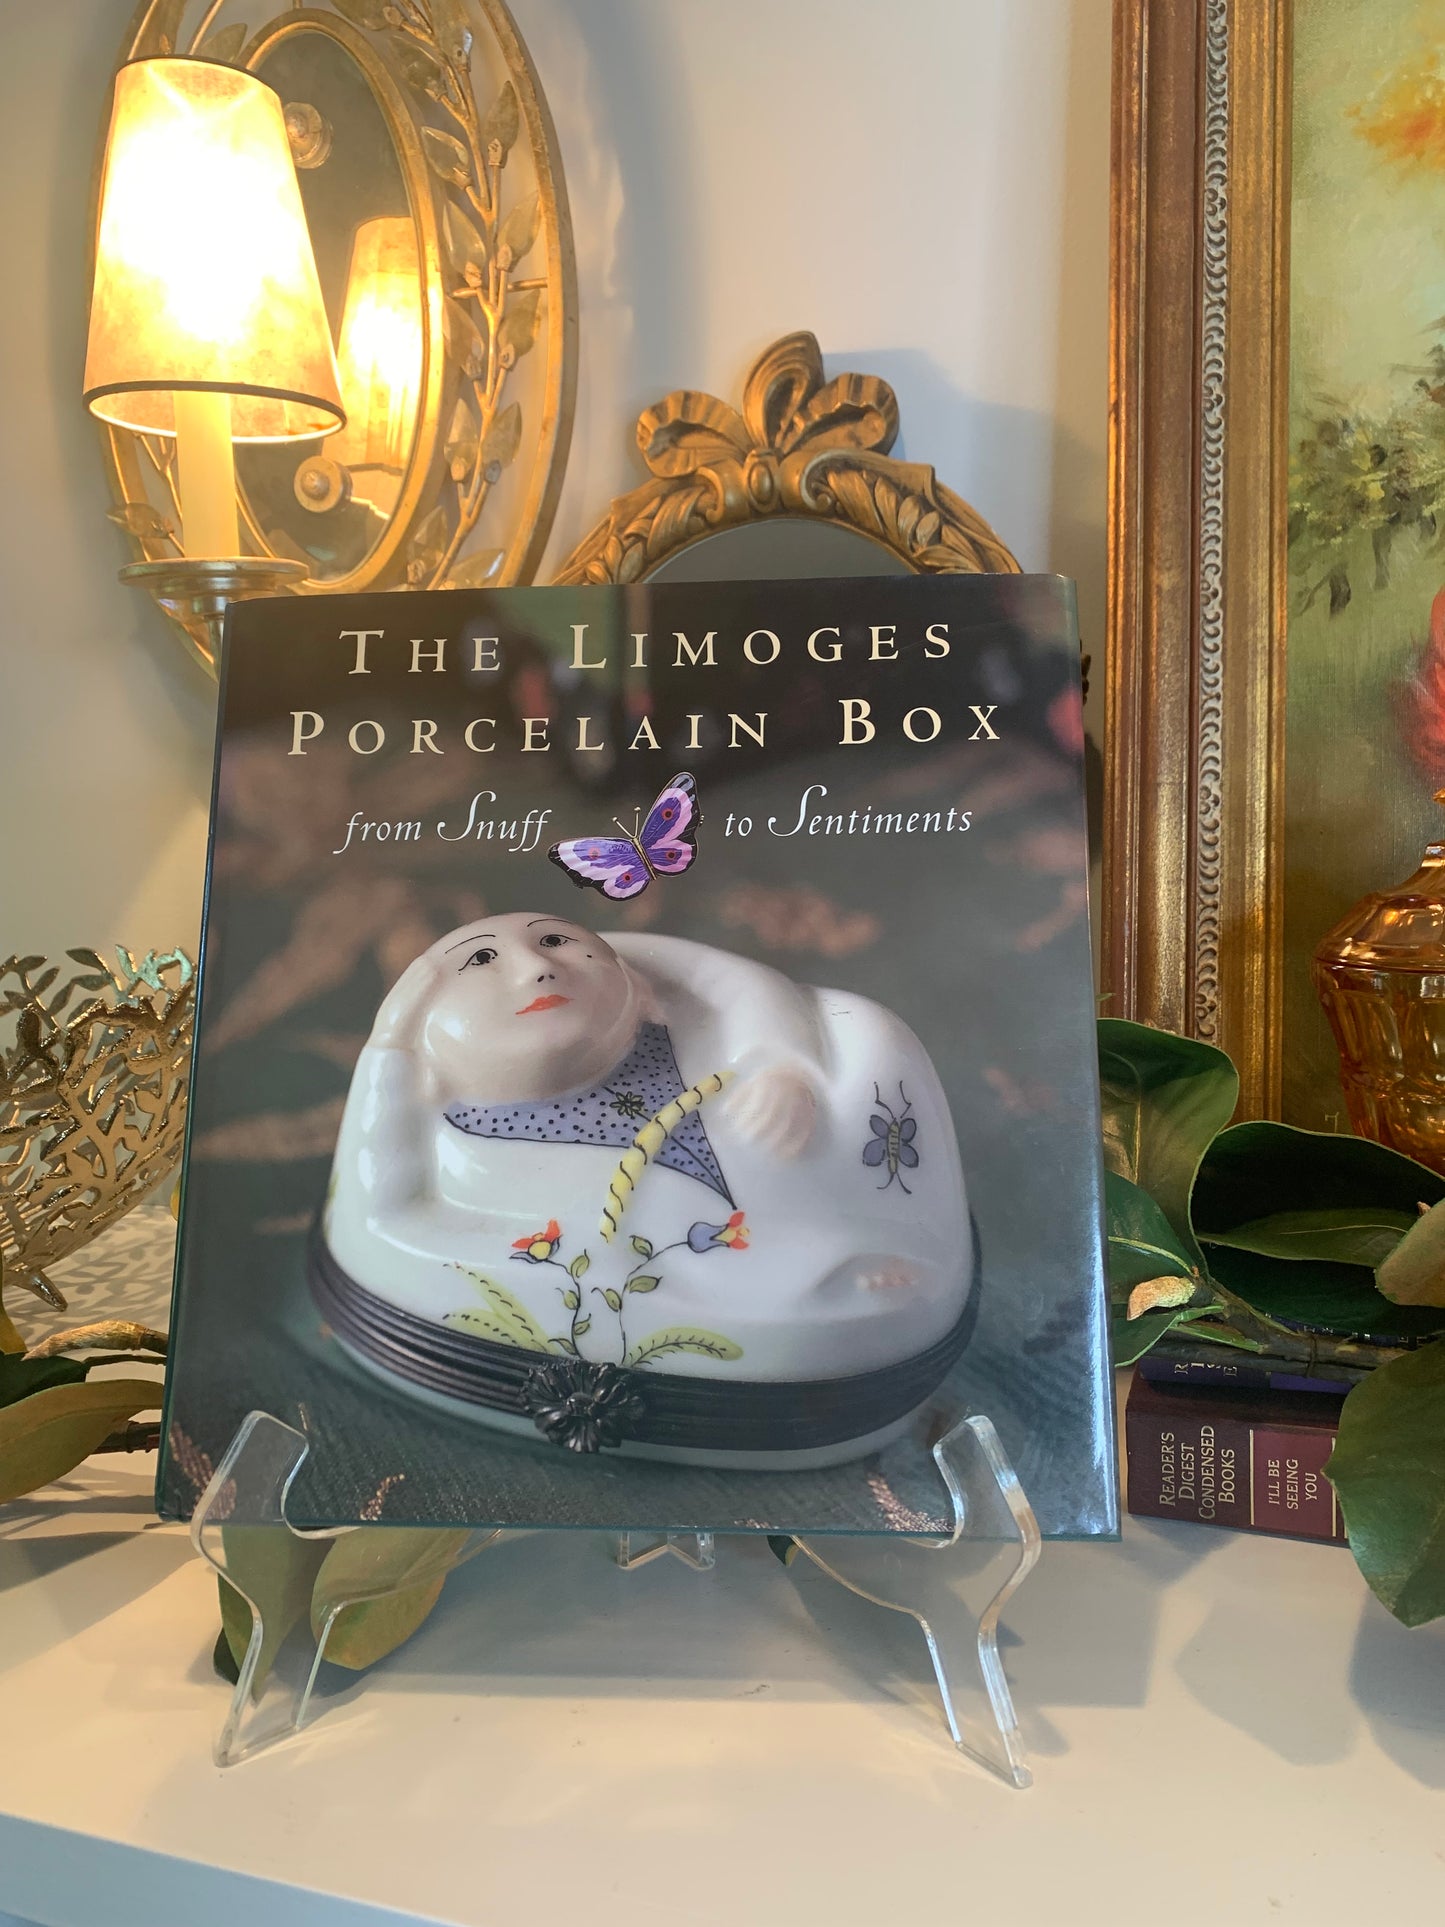 The Limoges Porcelain Box (First Edition)